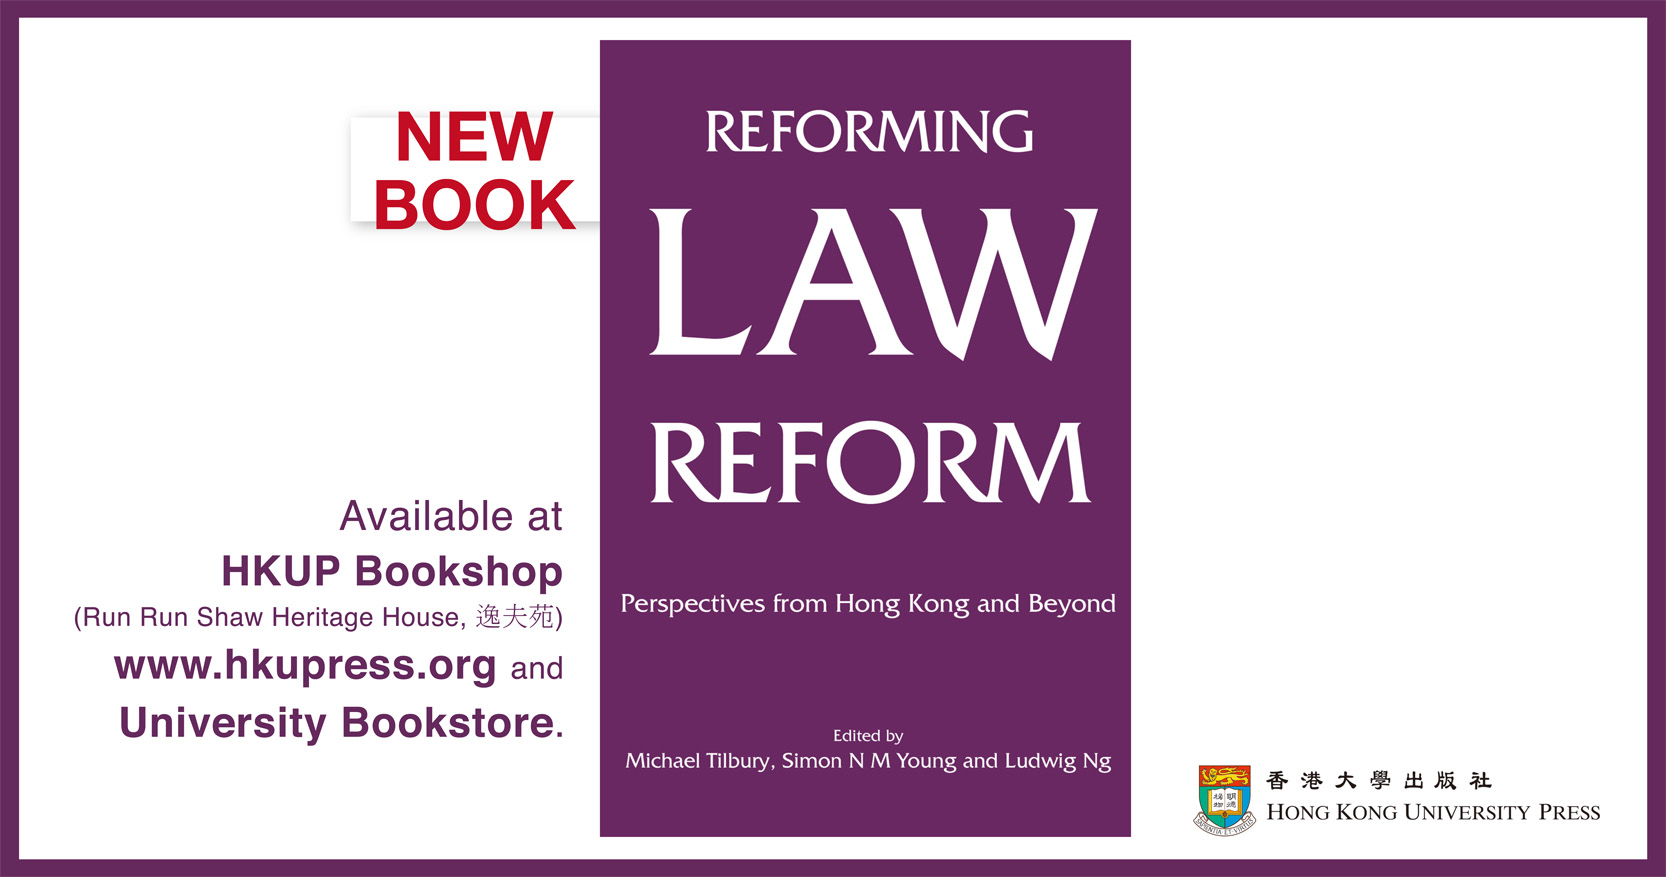 Reforming Law Reform - New Book published by HKU Press.